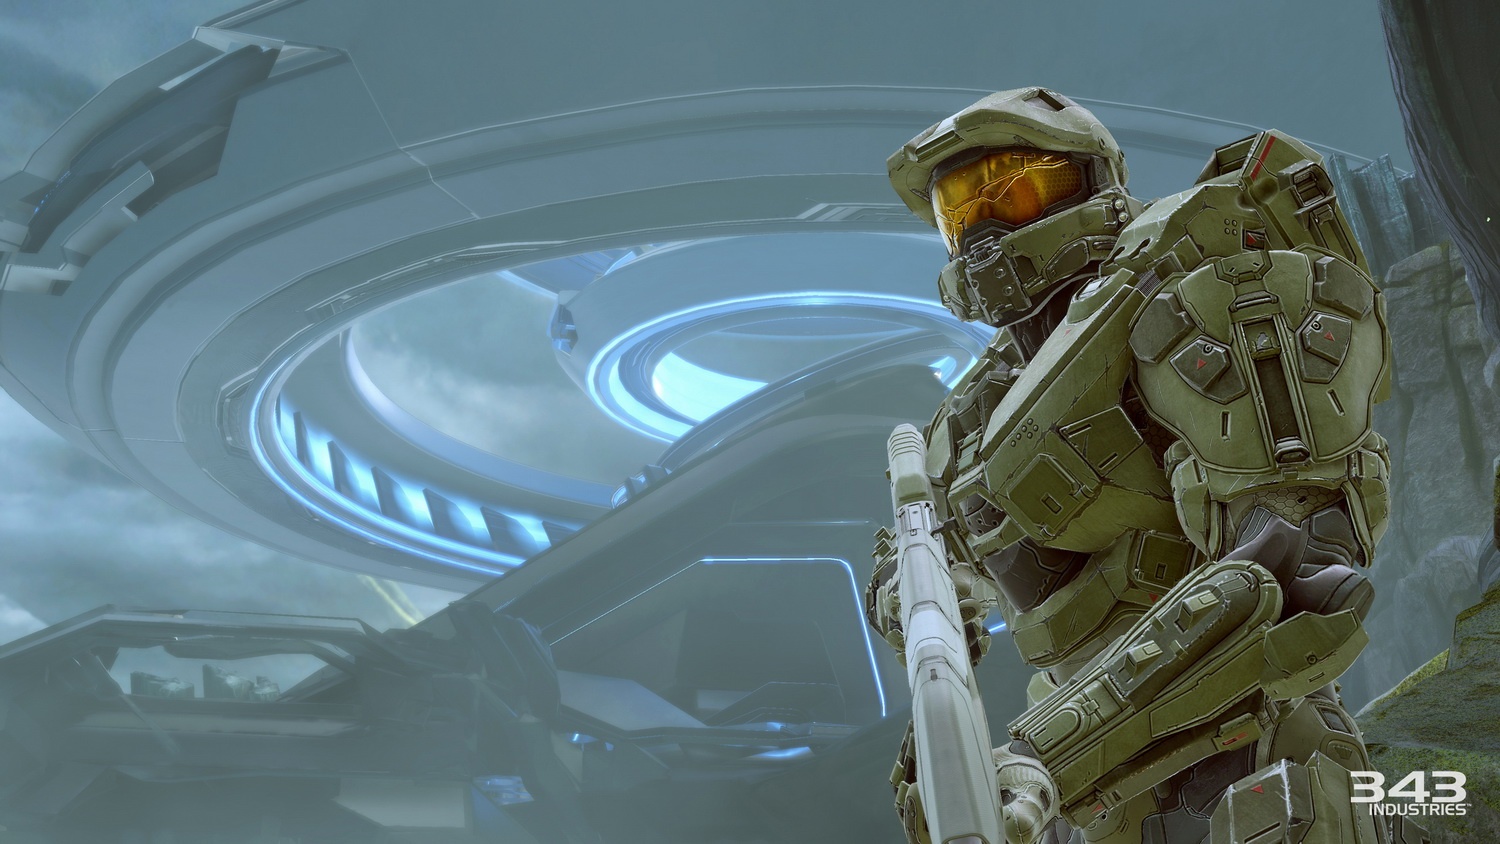 With Warzone, Halo 5: Guardians returns to online multiplayer relevance